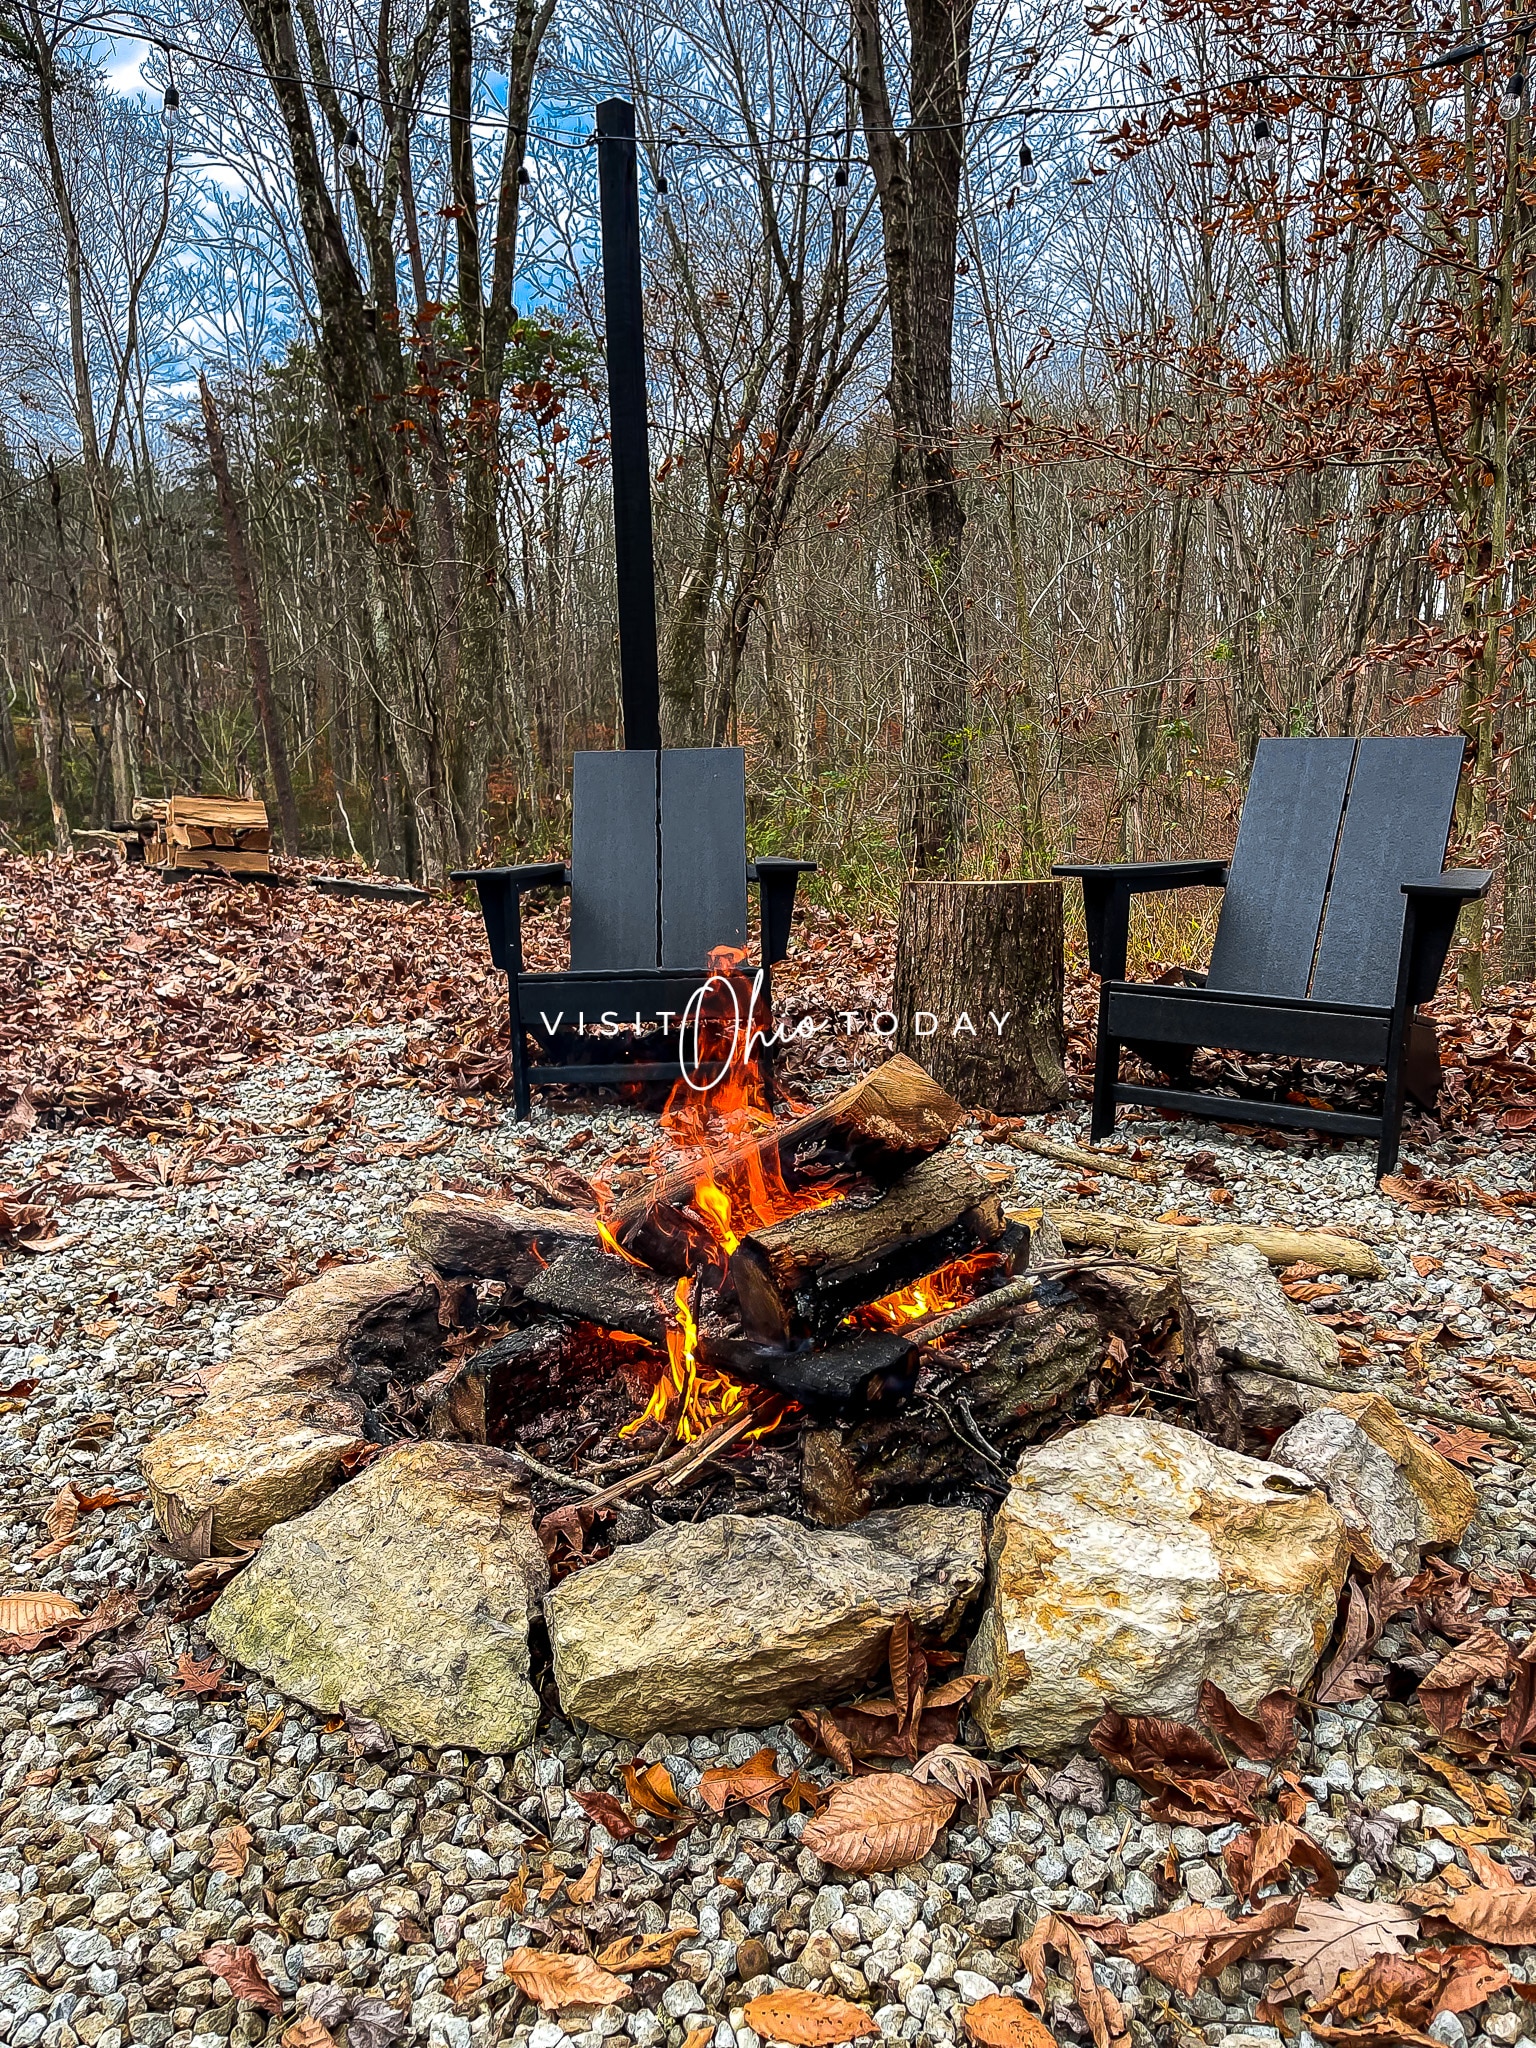 outside in a forest, fire going and two black chairs in background Photo credit: Cindy Gordon of VisitOhioToday.com